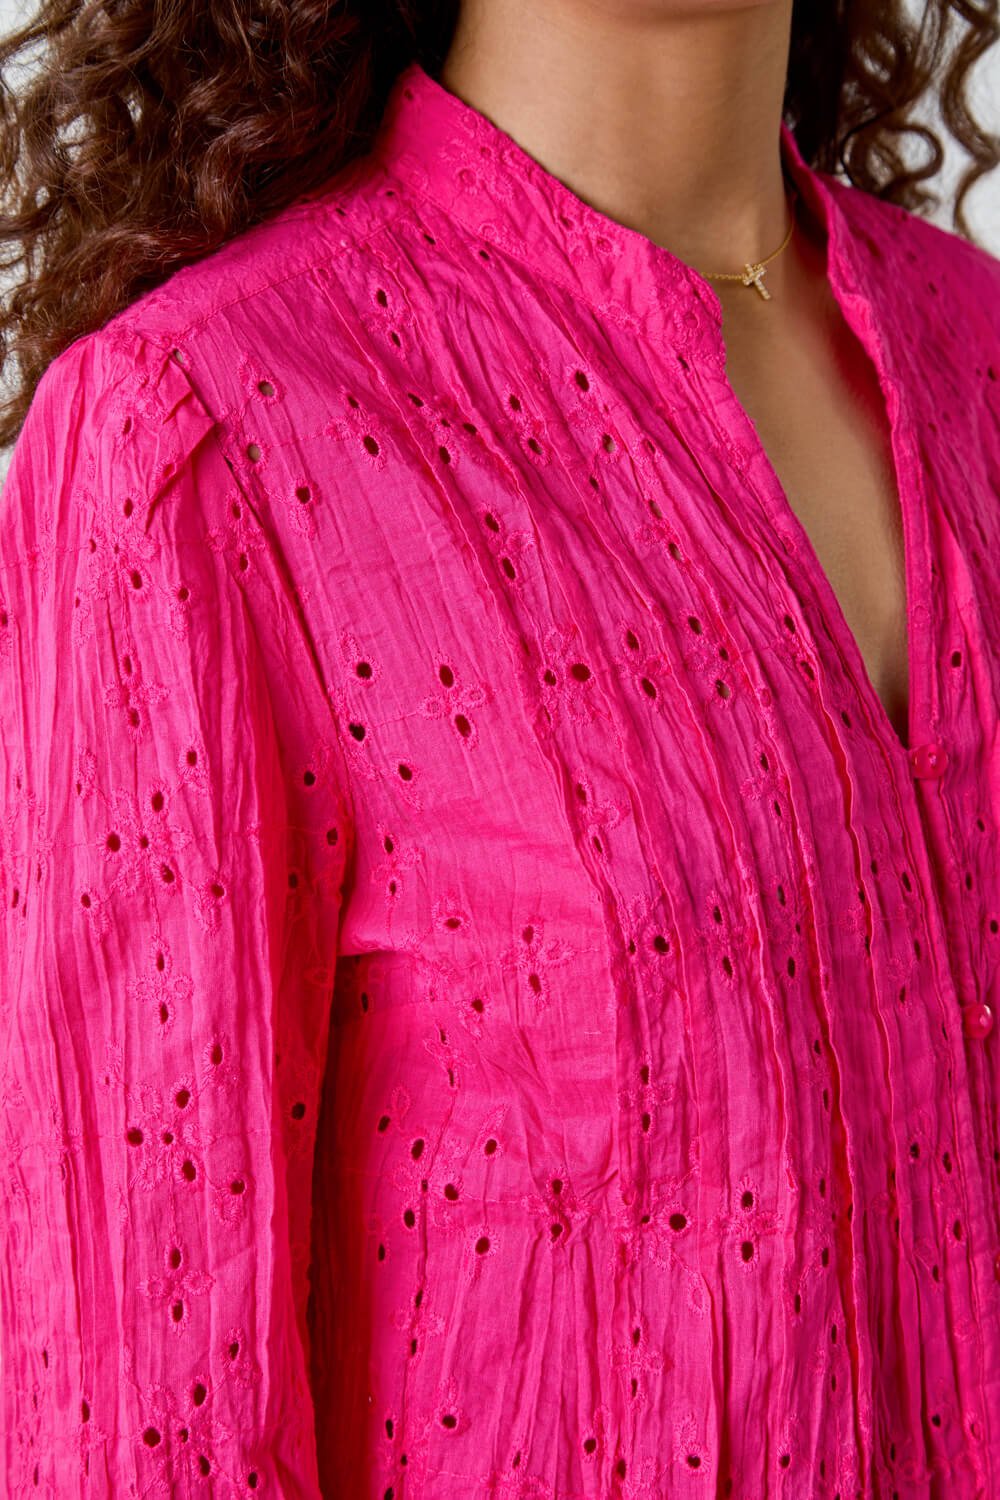 CERISE Embroidered Crinkle Cotton Blouse, Image 5 of 5